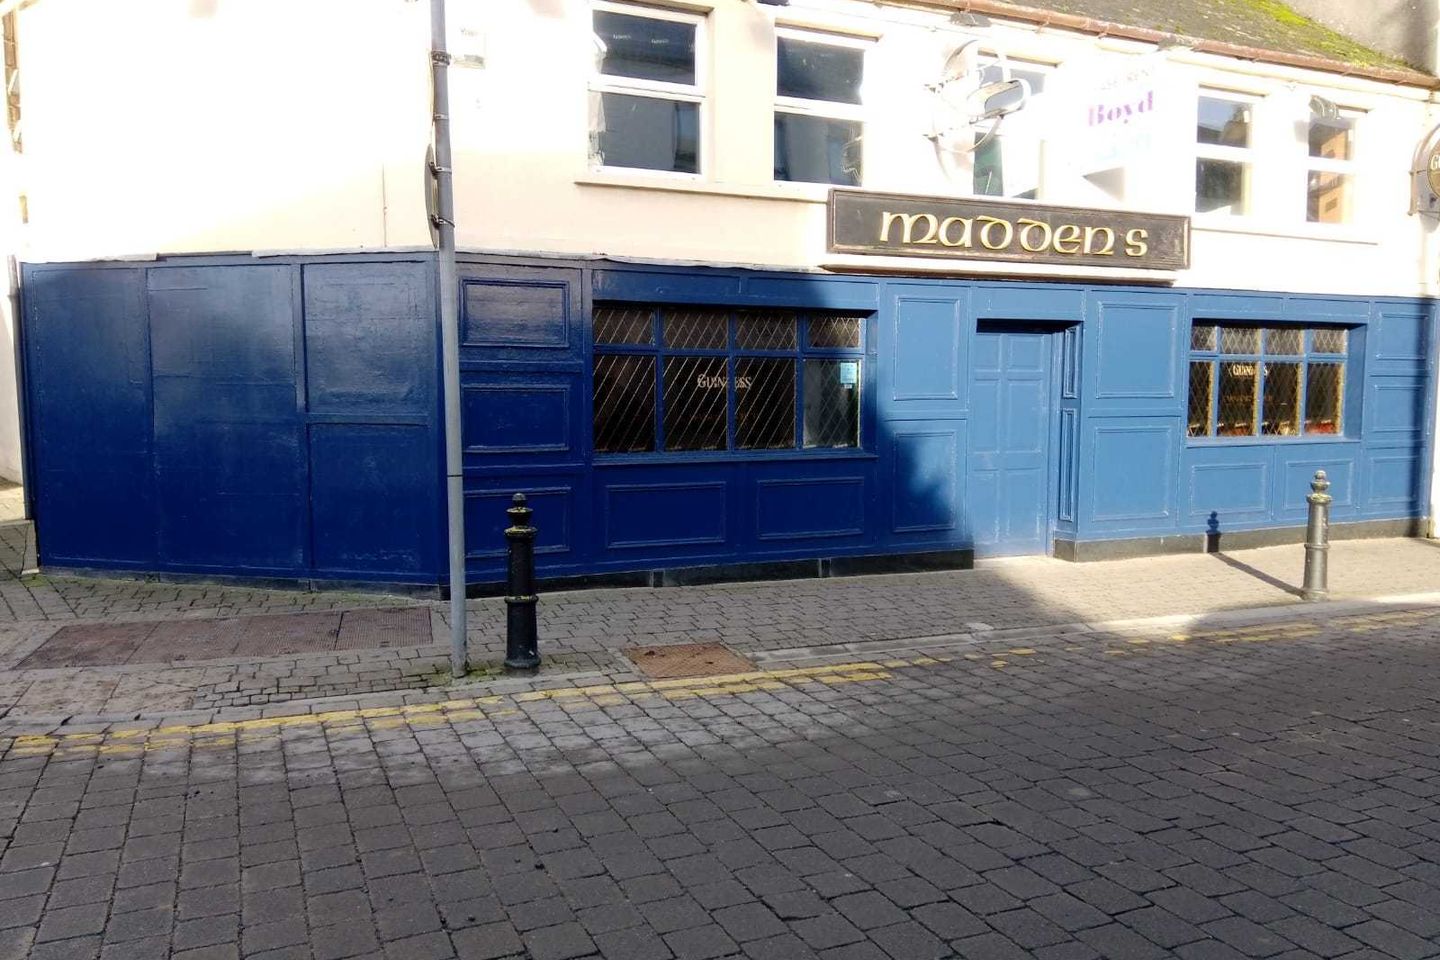 Maddens Licenced Premises, Connolly Street, Nenagh, Co. Tipperary